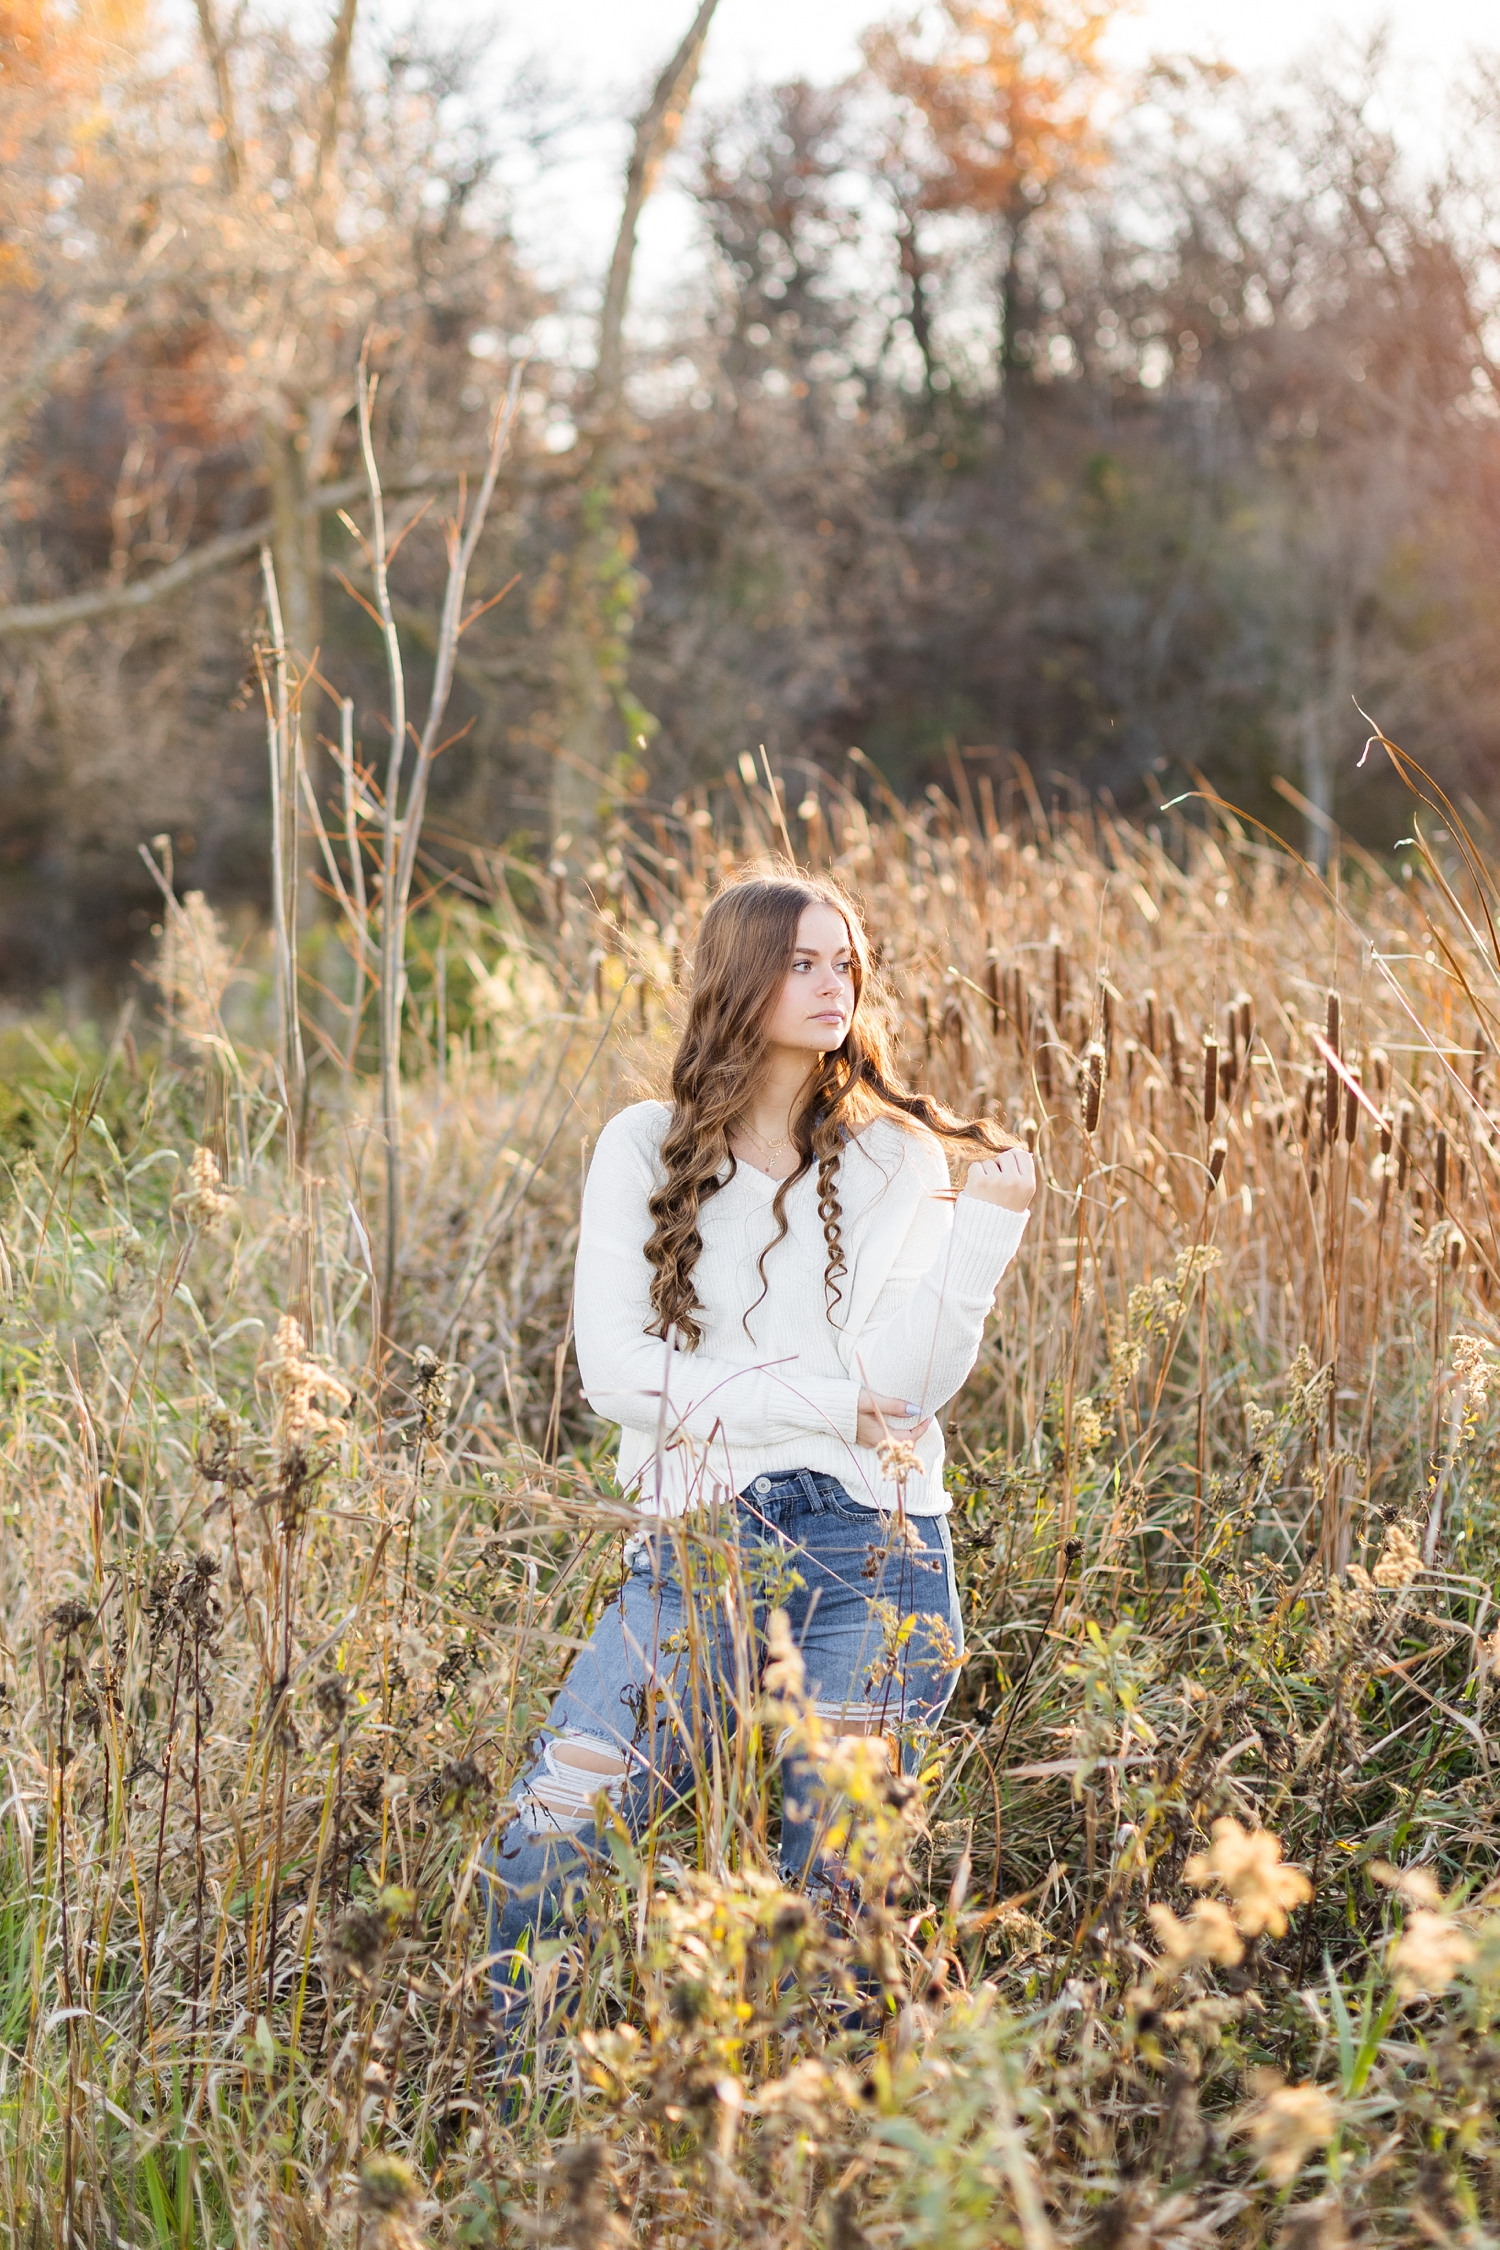 Avery stands in a grassy field filled with cattails at golden hour at Cottonwood Trail in Humboldt, IA | CB Studio